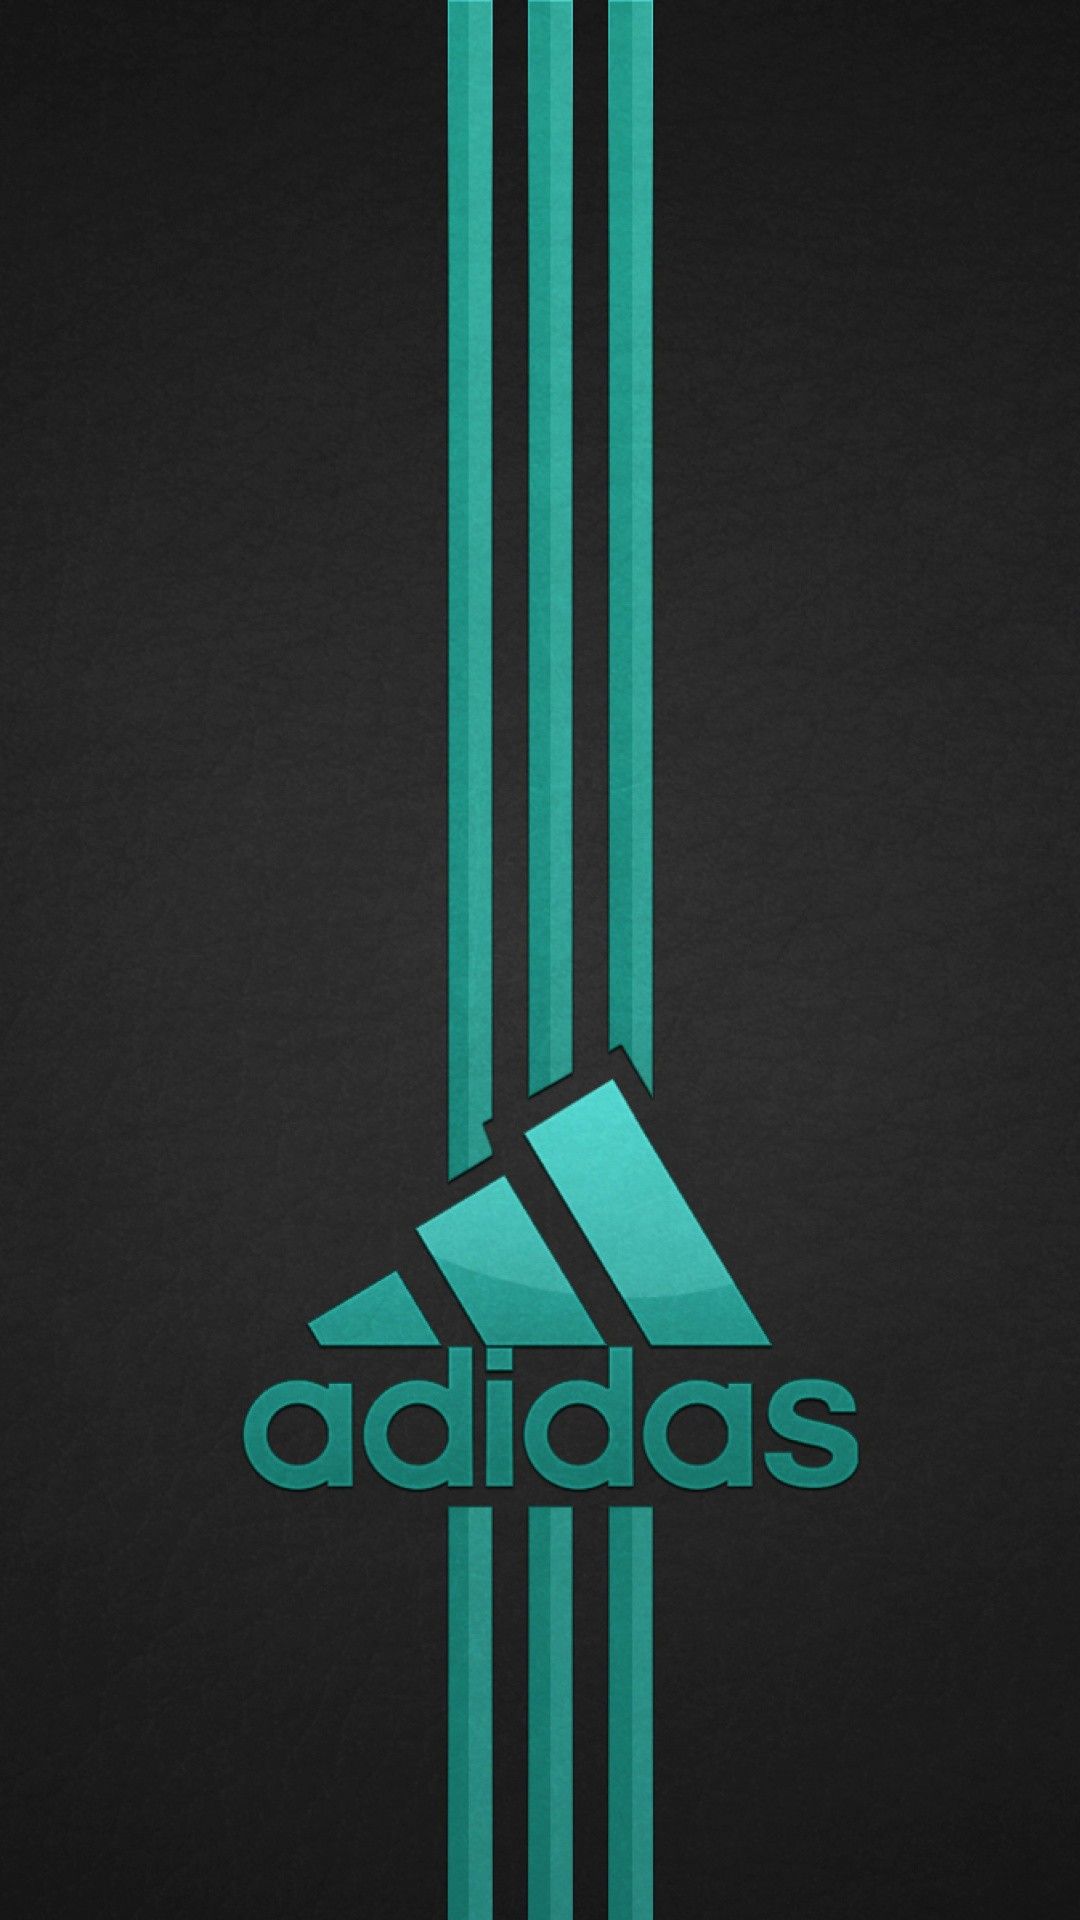 Adidas Hd Android Wallpapers Wallpaper Cave